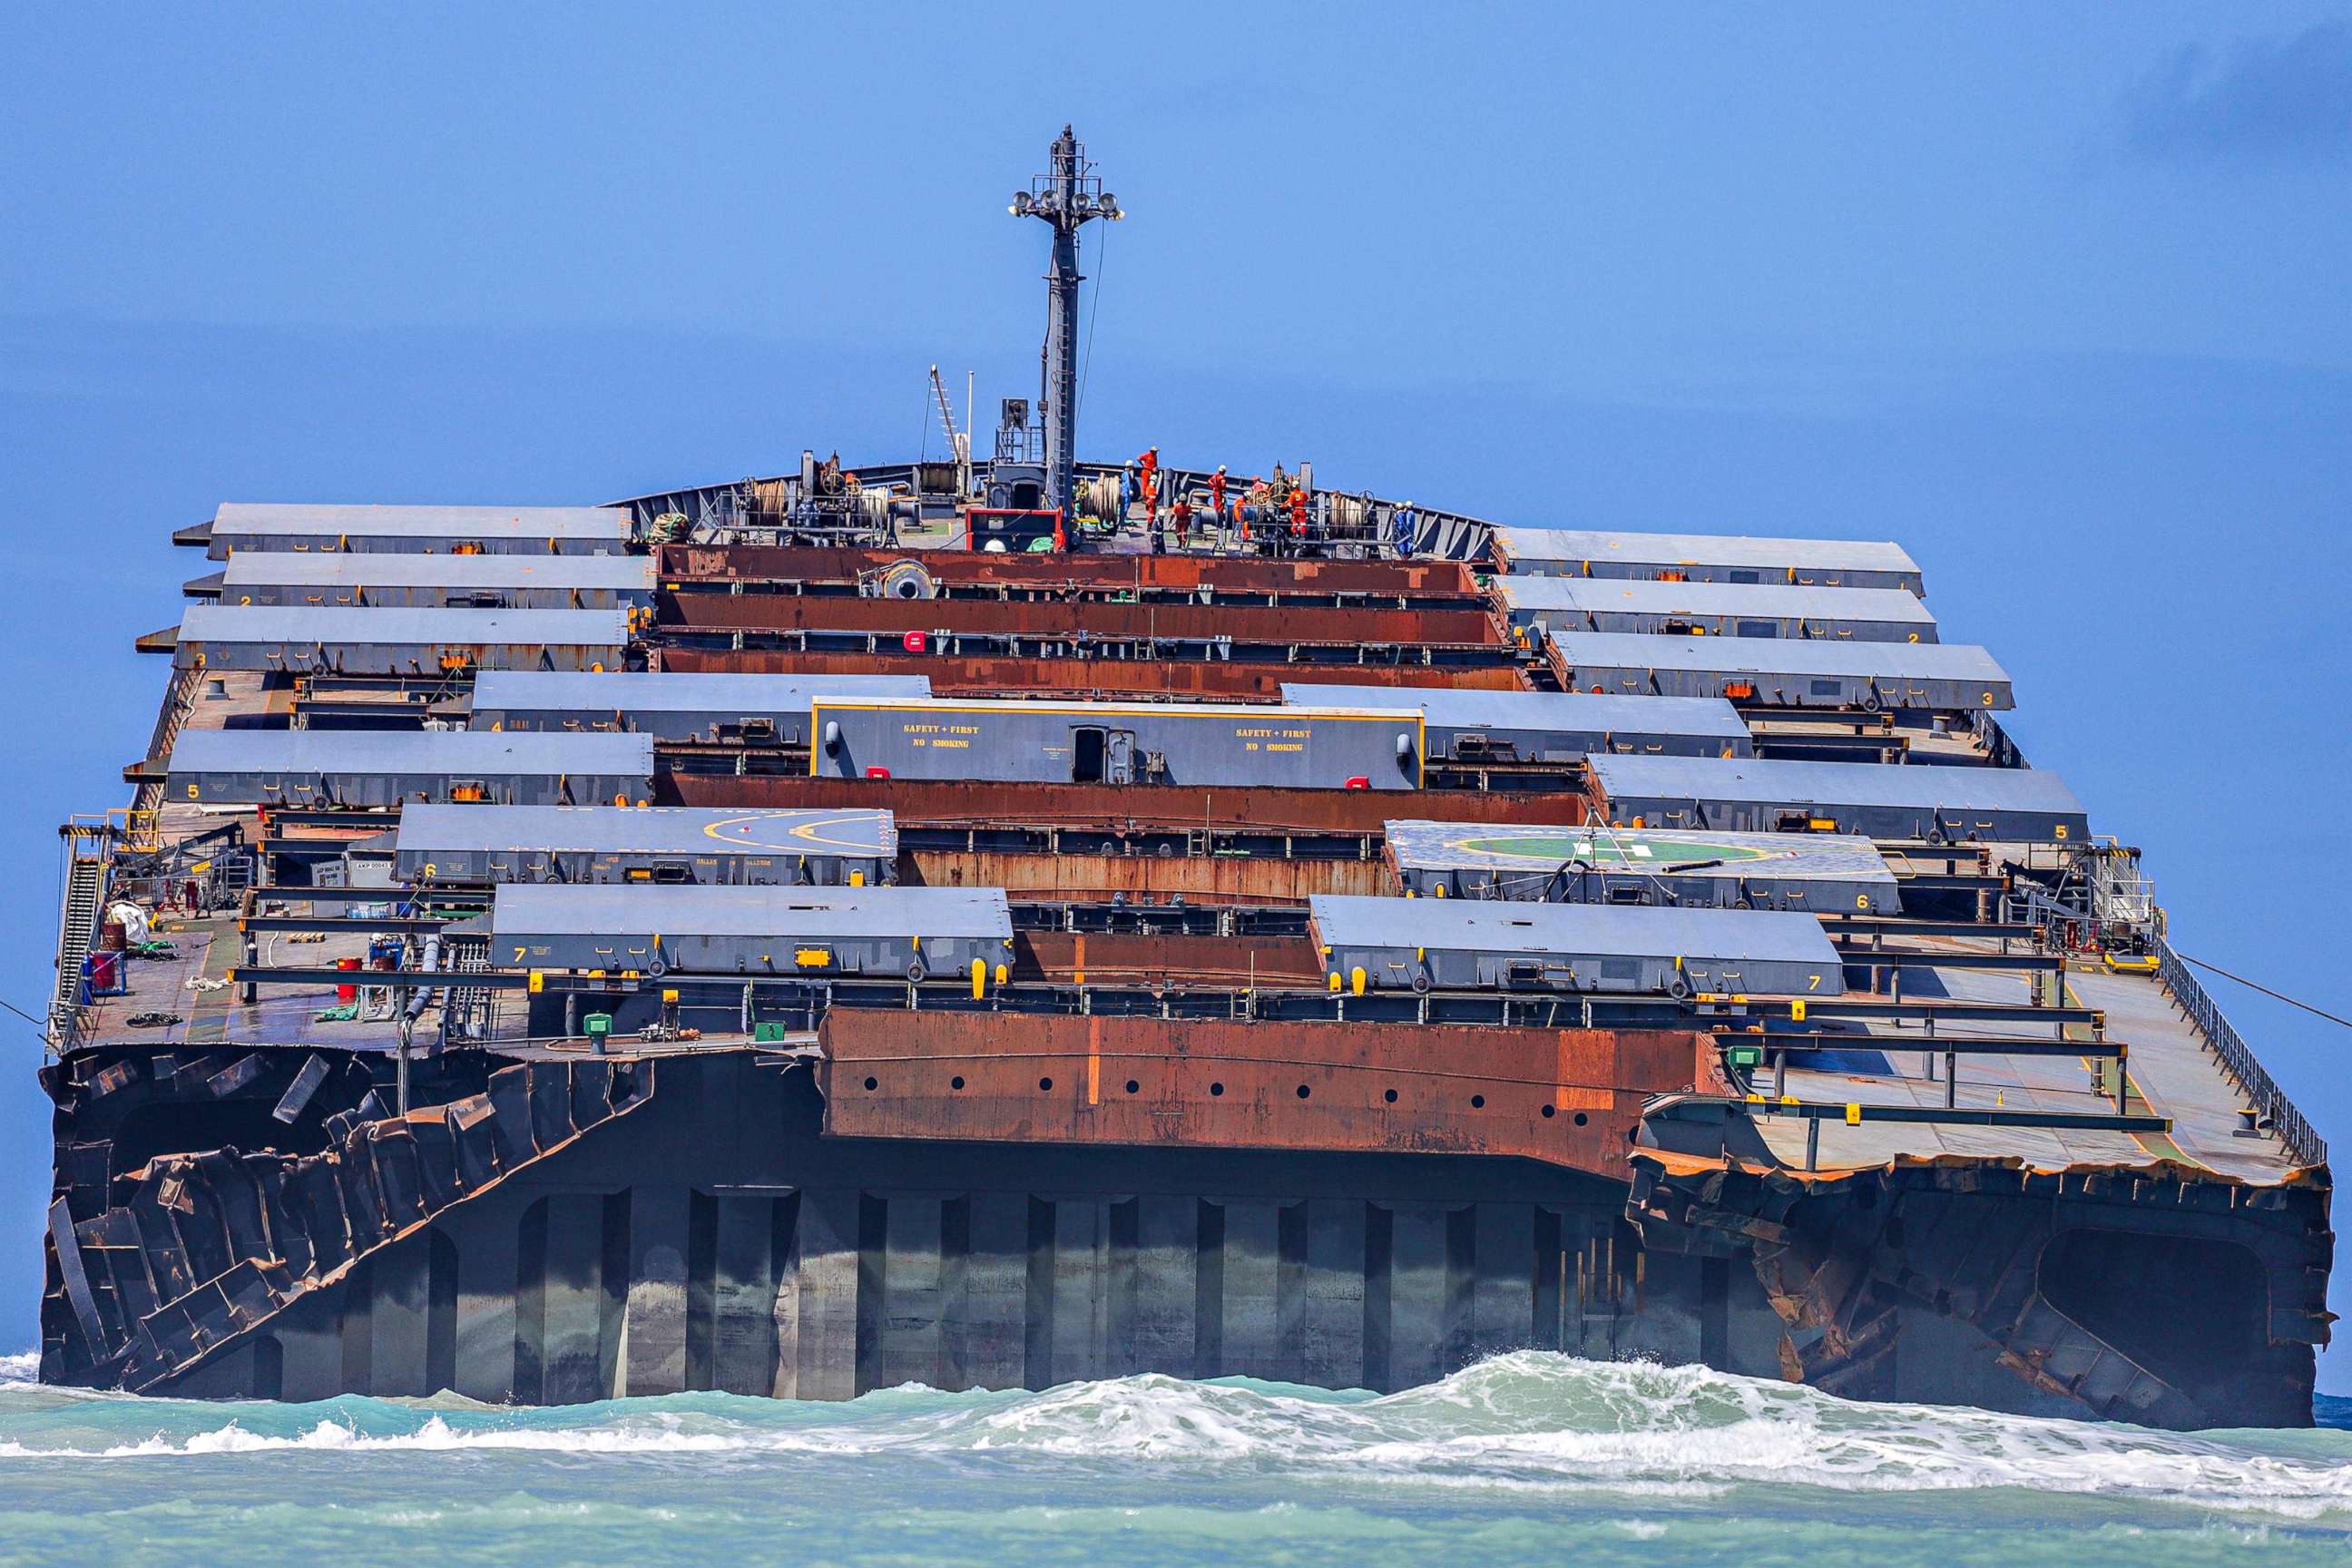 PHOTO: The front section of the MV Wakashio lies in the Indian Ocean after breaking into two parts, near Blue Bay Marine Park, off the coast of south-east Mauritius, Aug. 17, 2020.